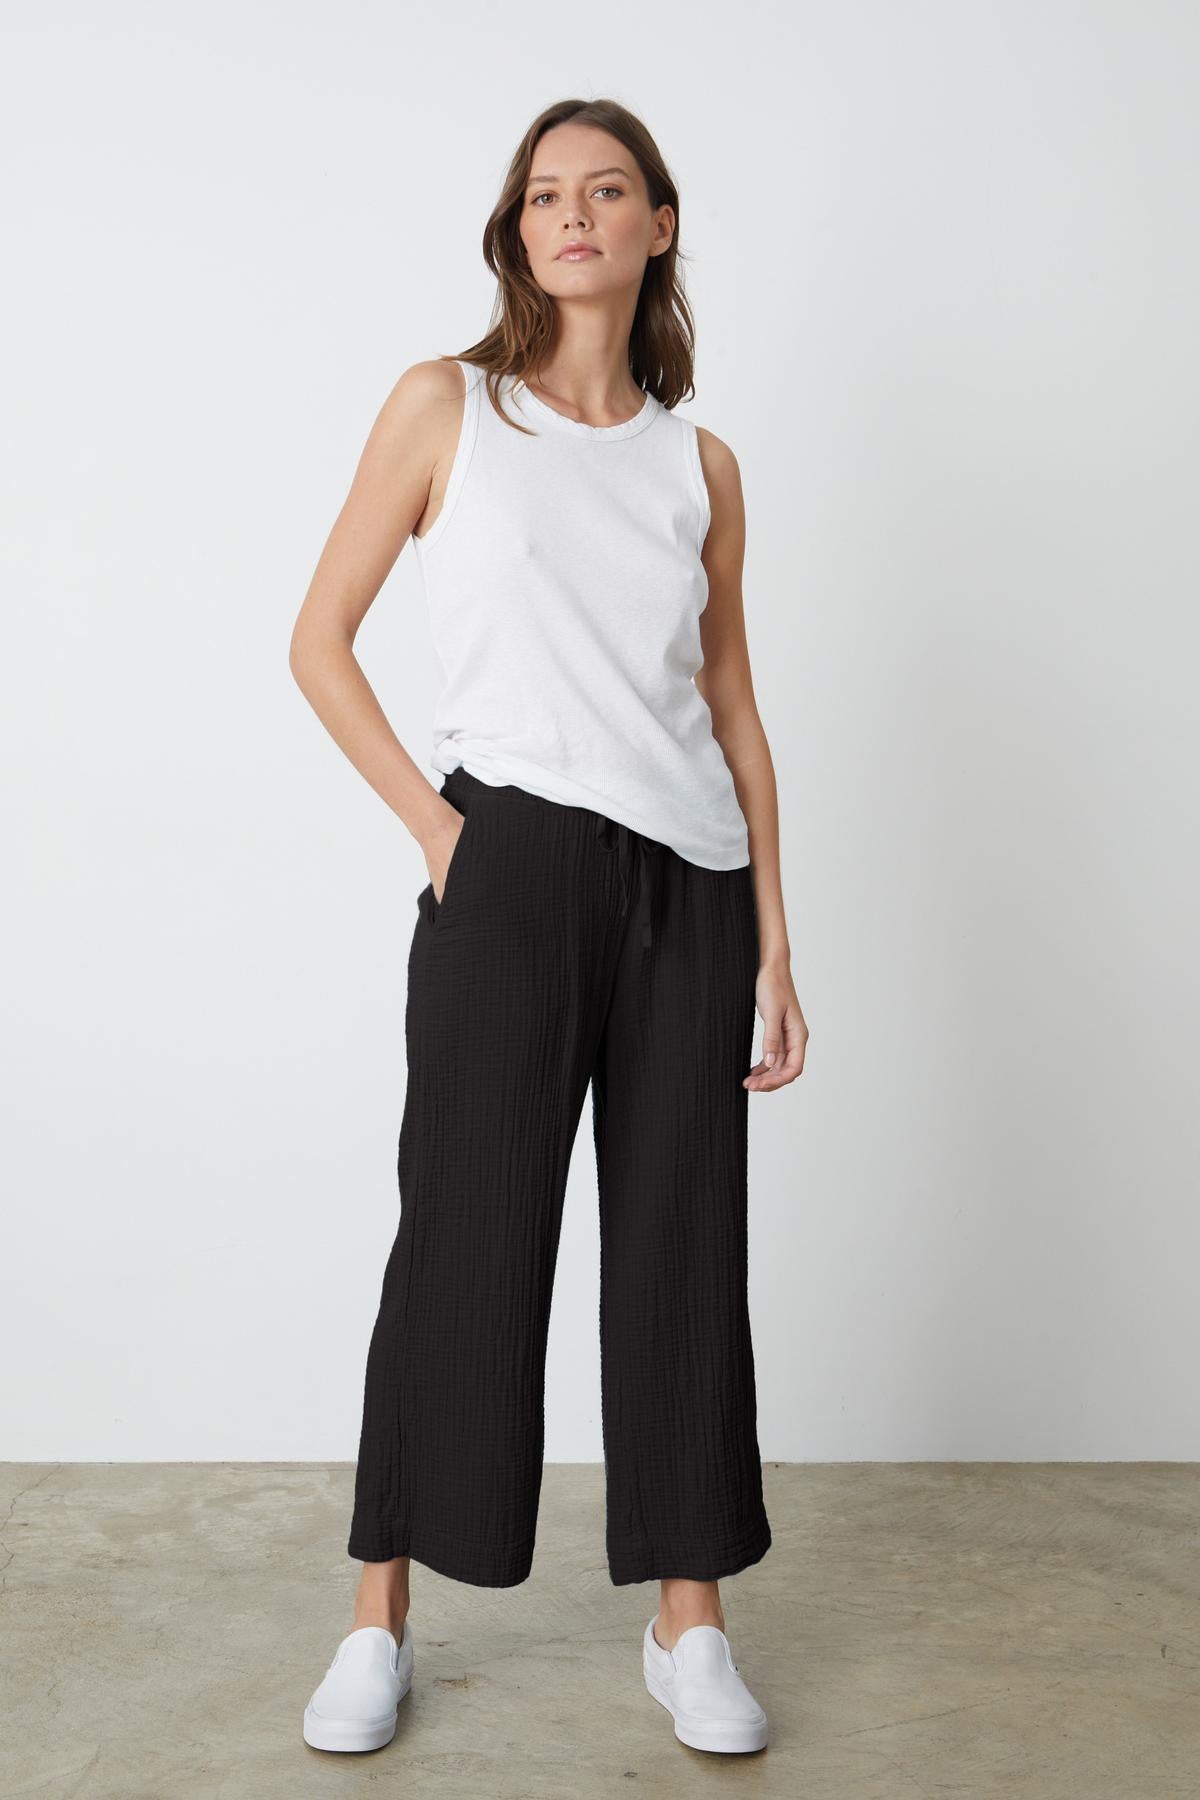 A woman wearing a white tank top and Velvet by Graham & Spencer FRANNY COTTON GAUZE PANT in black with white sneakers full length front-26262343745729